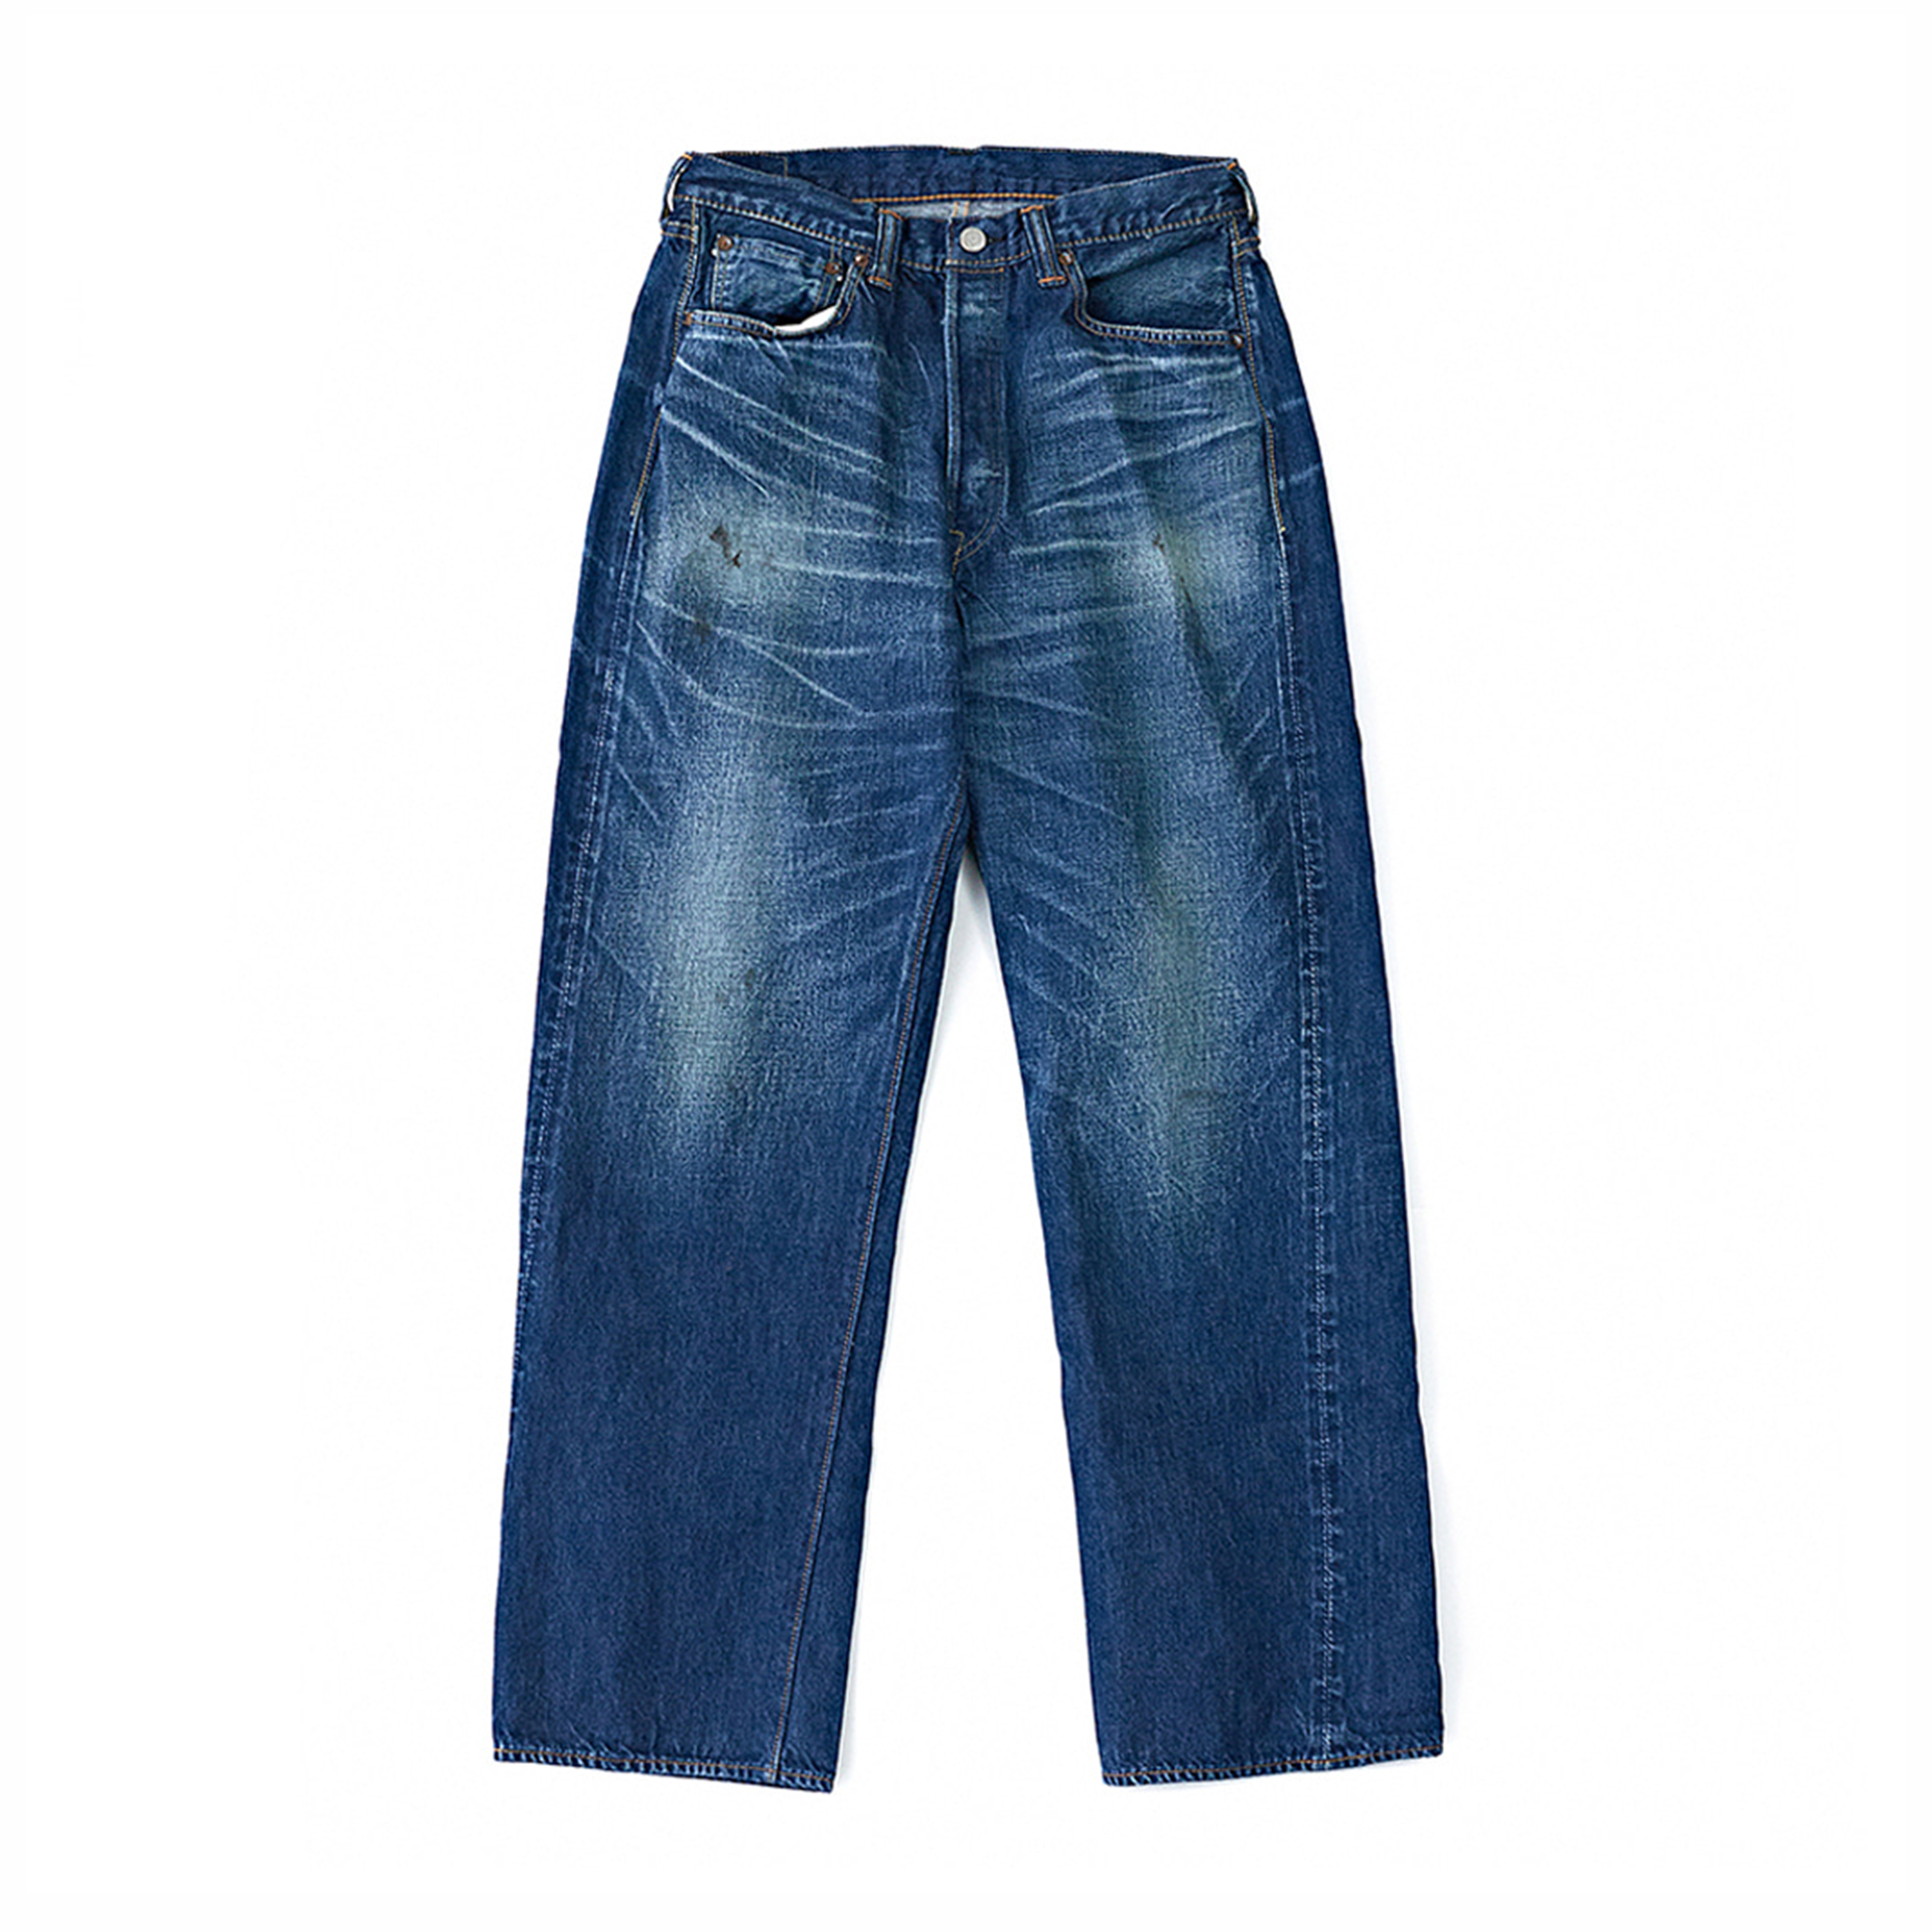 0105 WIDE DENIM - MORE THAN REAL